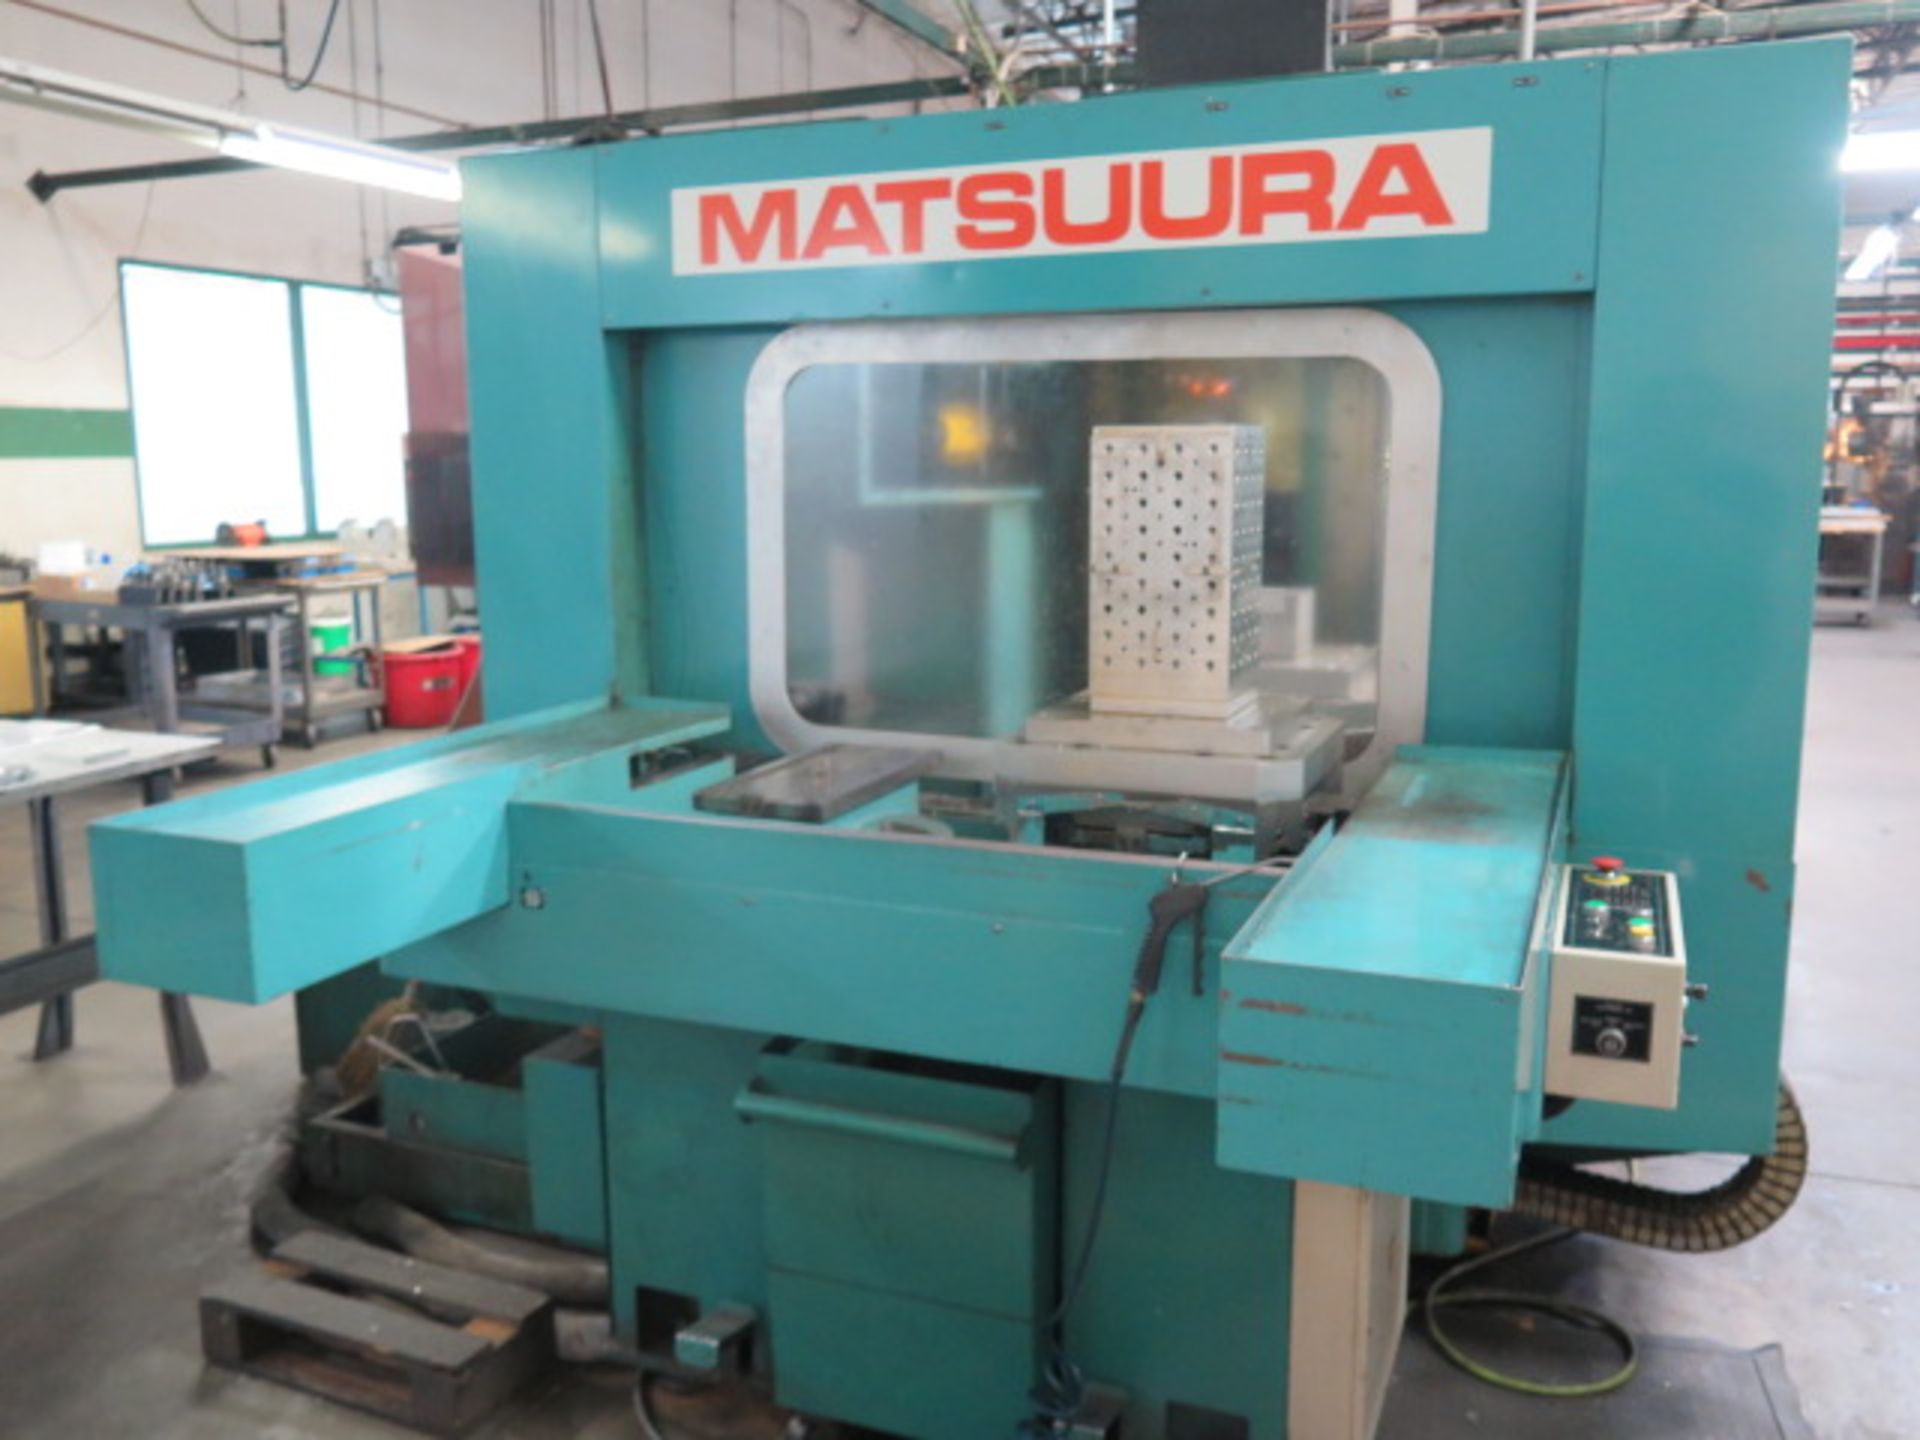 Matsuura MC-600H-45 2-Pallet 4-Axis CNC HMC s/n 85044883 w/ Fanuc 11M, SOLD AS IS, LIVERMORE, CA - Image 12 of 20